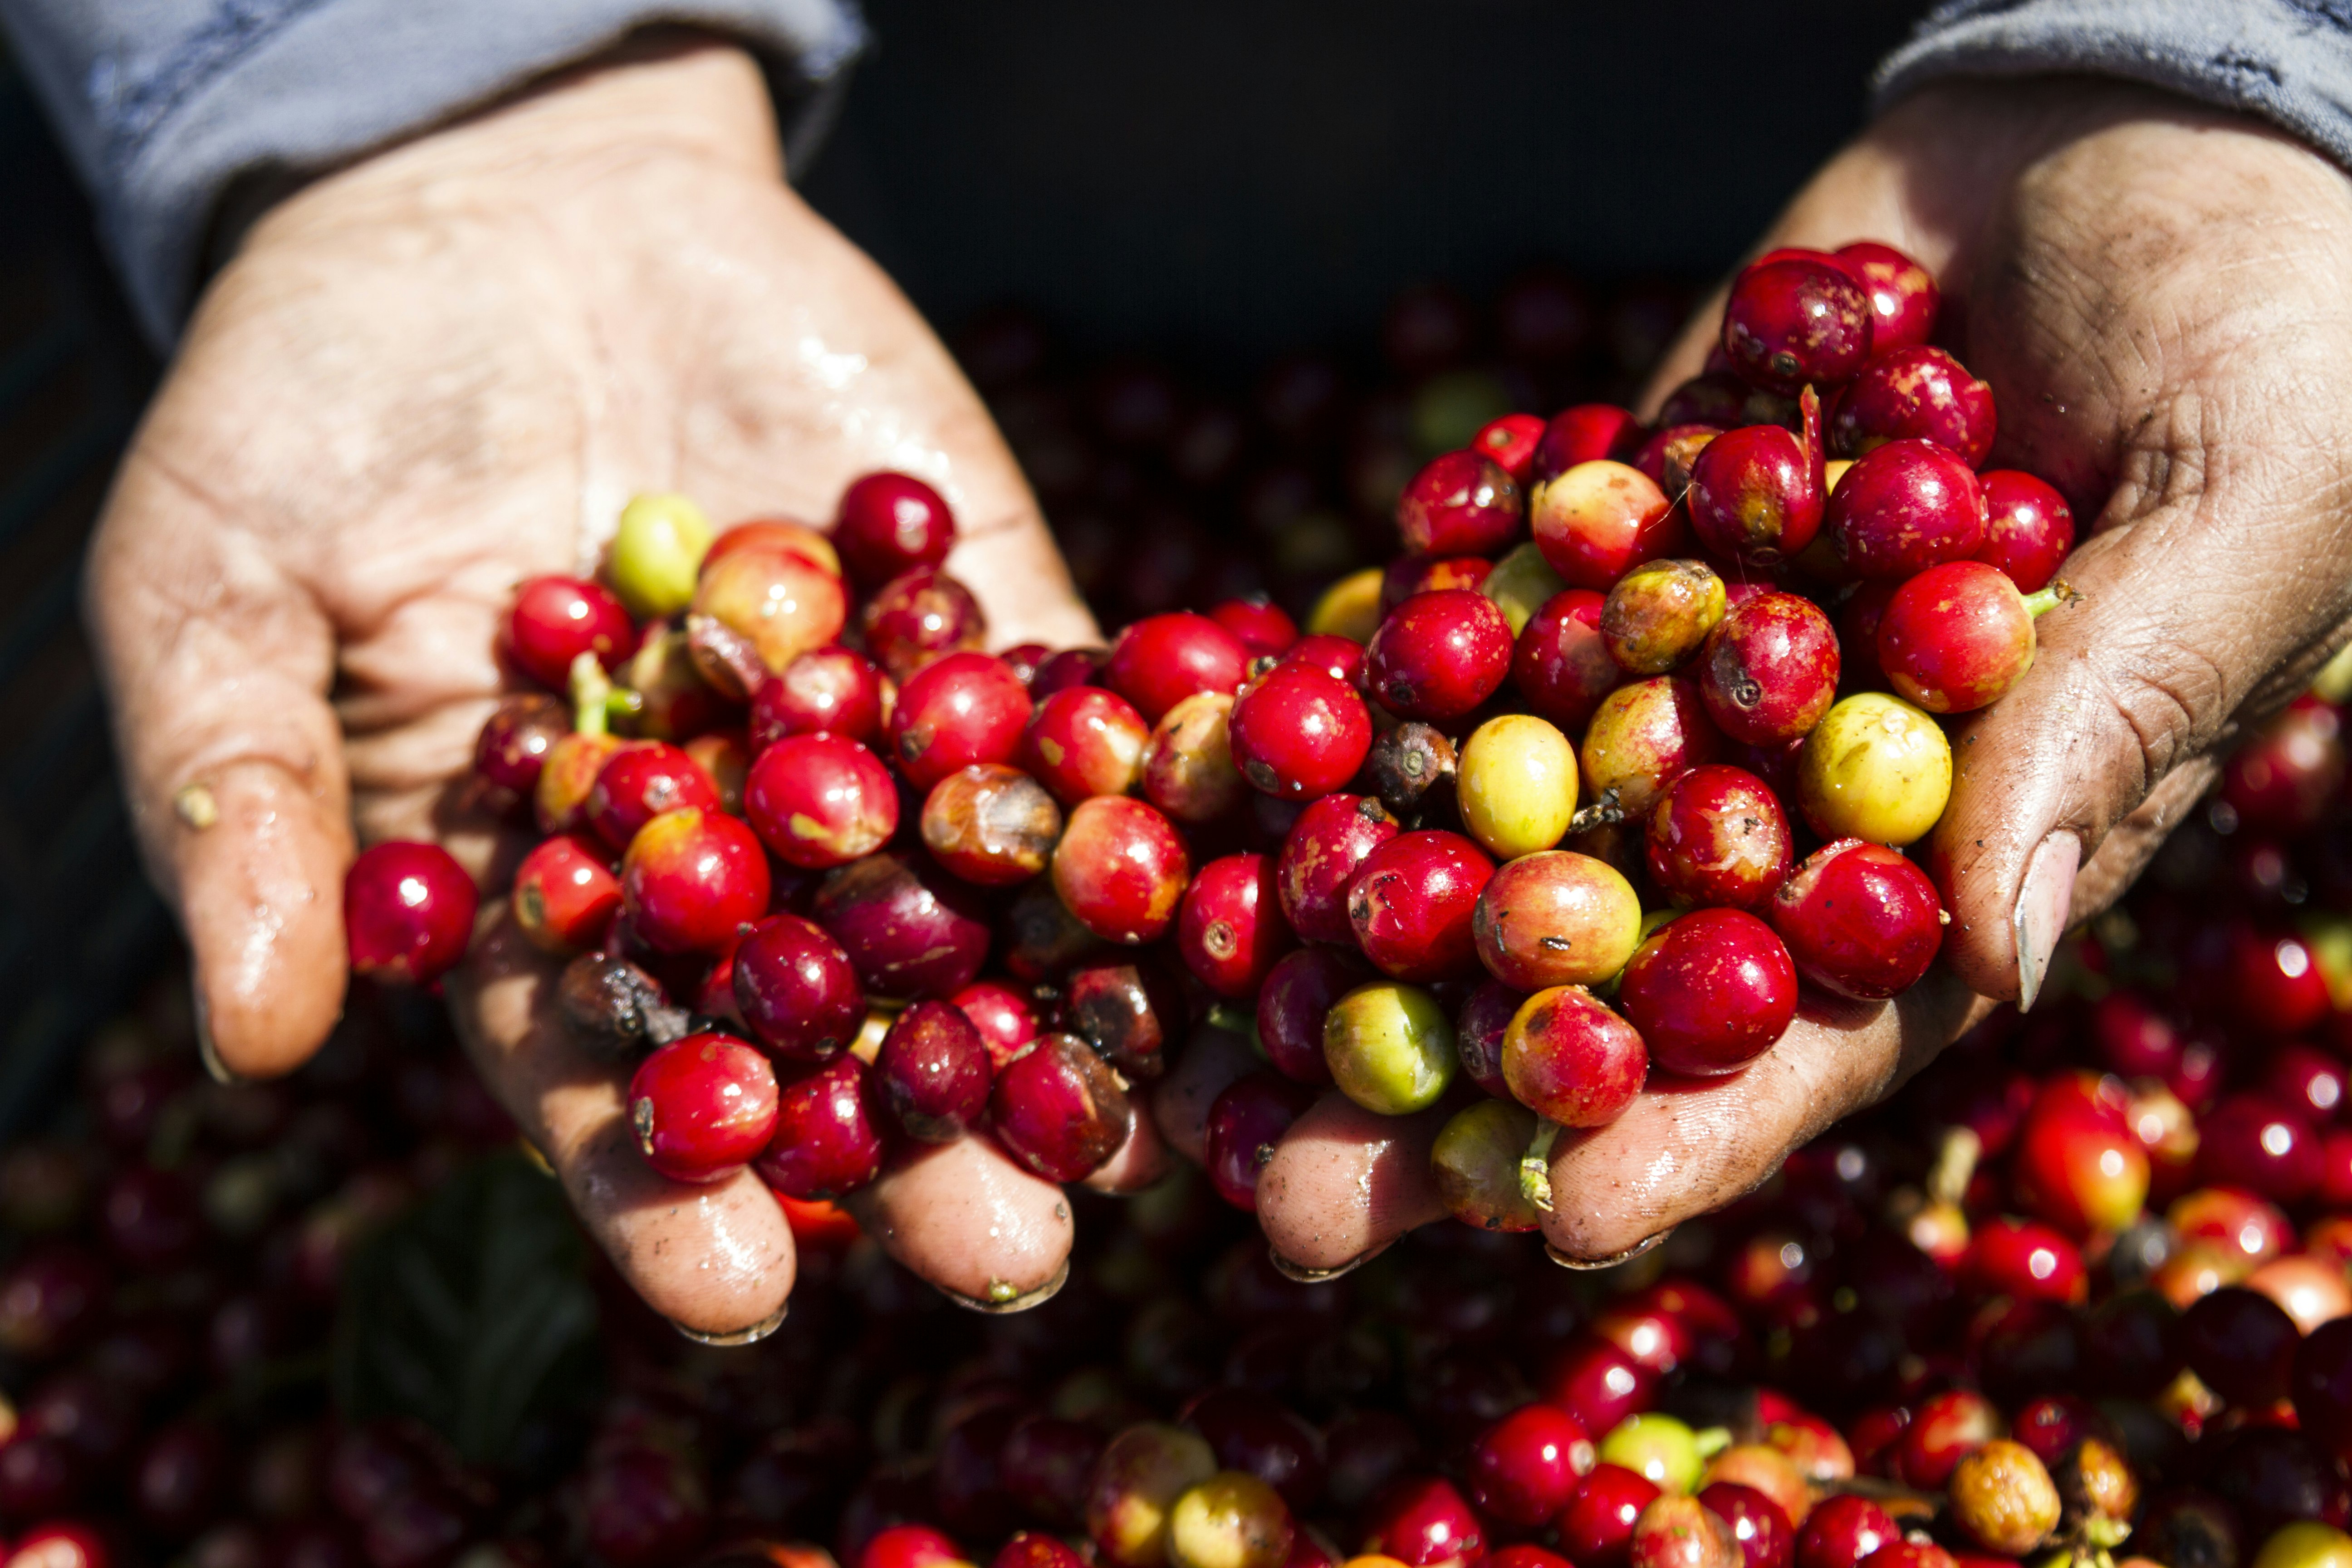 A pair of hands hold ruby-red coffee beans above a basket full of coffee beans.